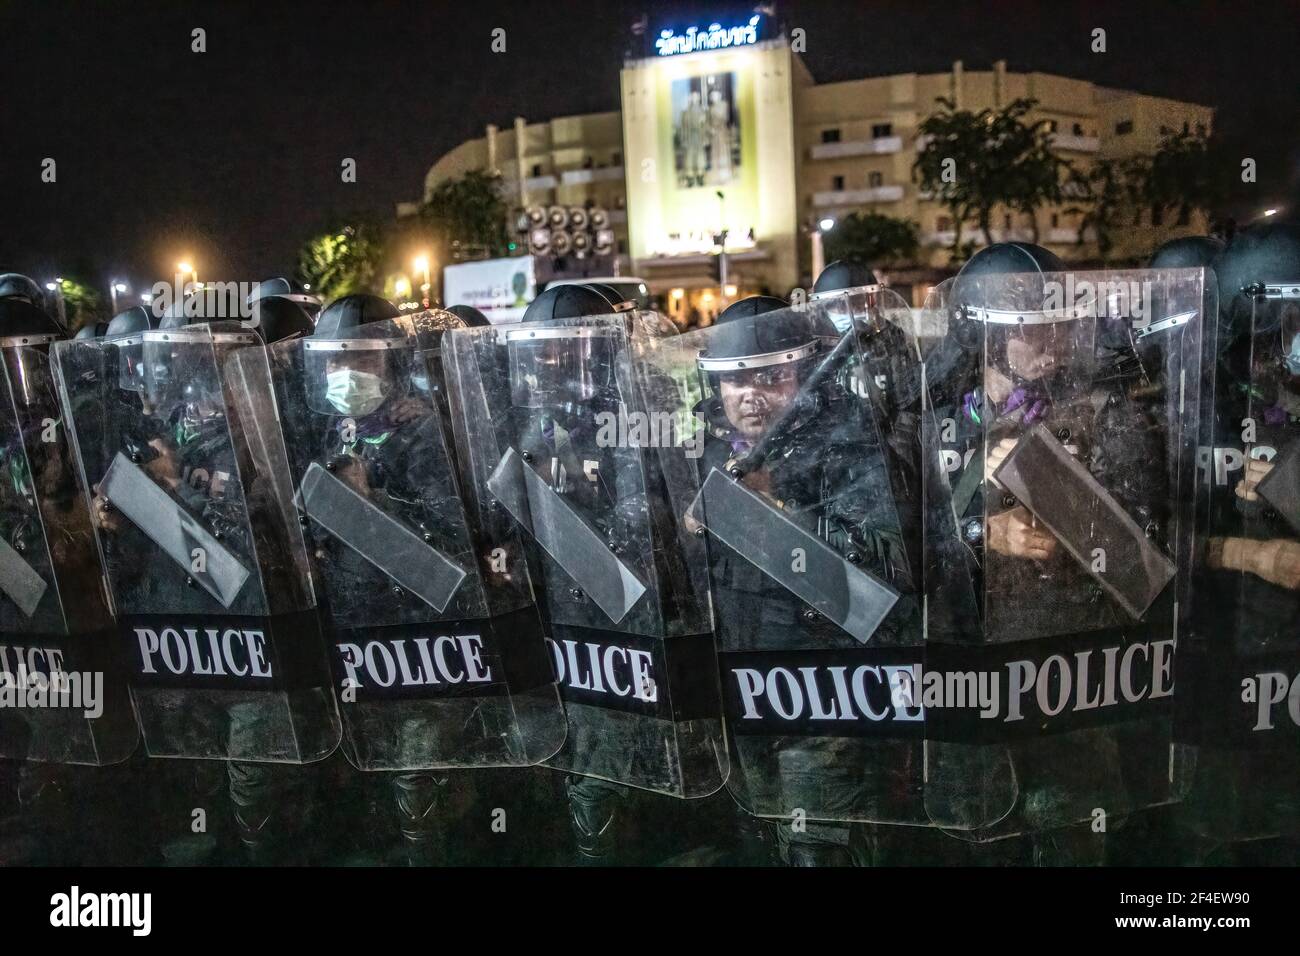 Riot police officers stands guard behind their shields during an anti-government demonstration in Bangkok. Thousands of pro-democracy protesters gathered near the Grand Palace in Sanam Luang demanding the resignation of Thailand Prime Minister and the reform of the monarchy. The protesters also denounced the use of the Lese Majeste law under the section 112 of the penal code. The protest organized by REDEM (Restart Democracy) ended up with several clashes, the use of water cannon, tear gas and rubber bullet, which had left several injured. Stock Photo